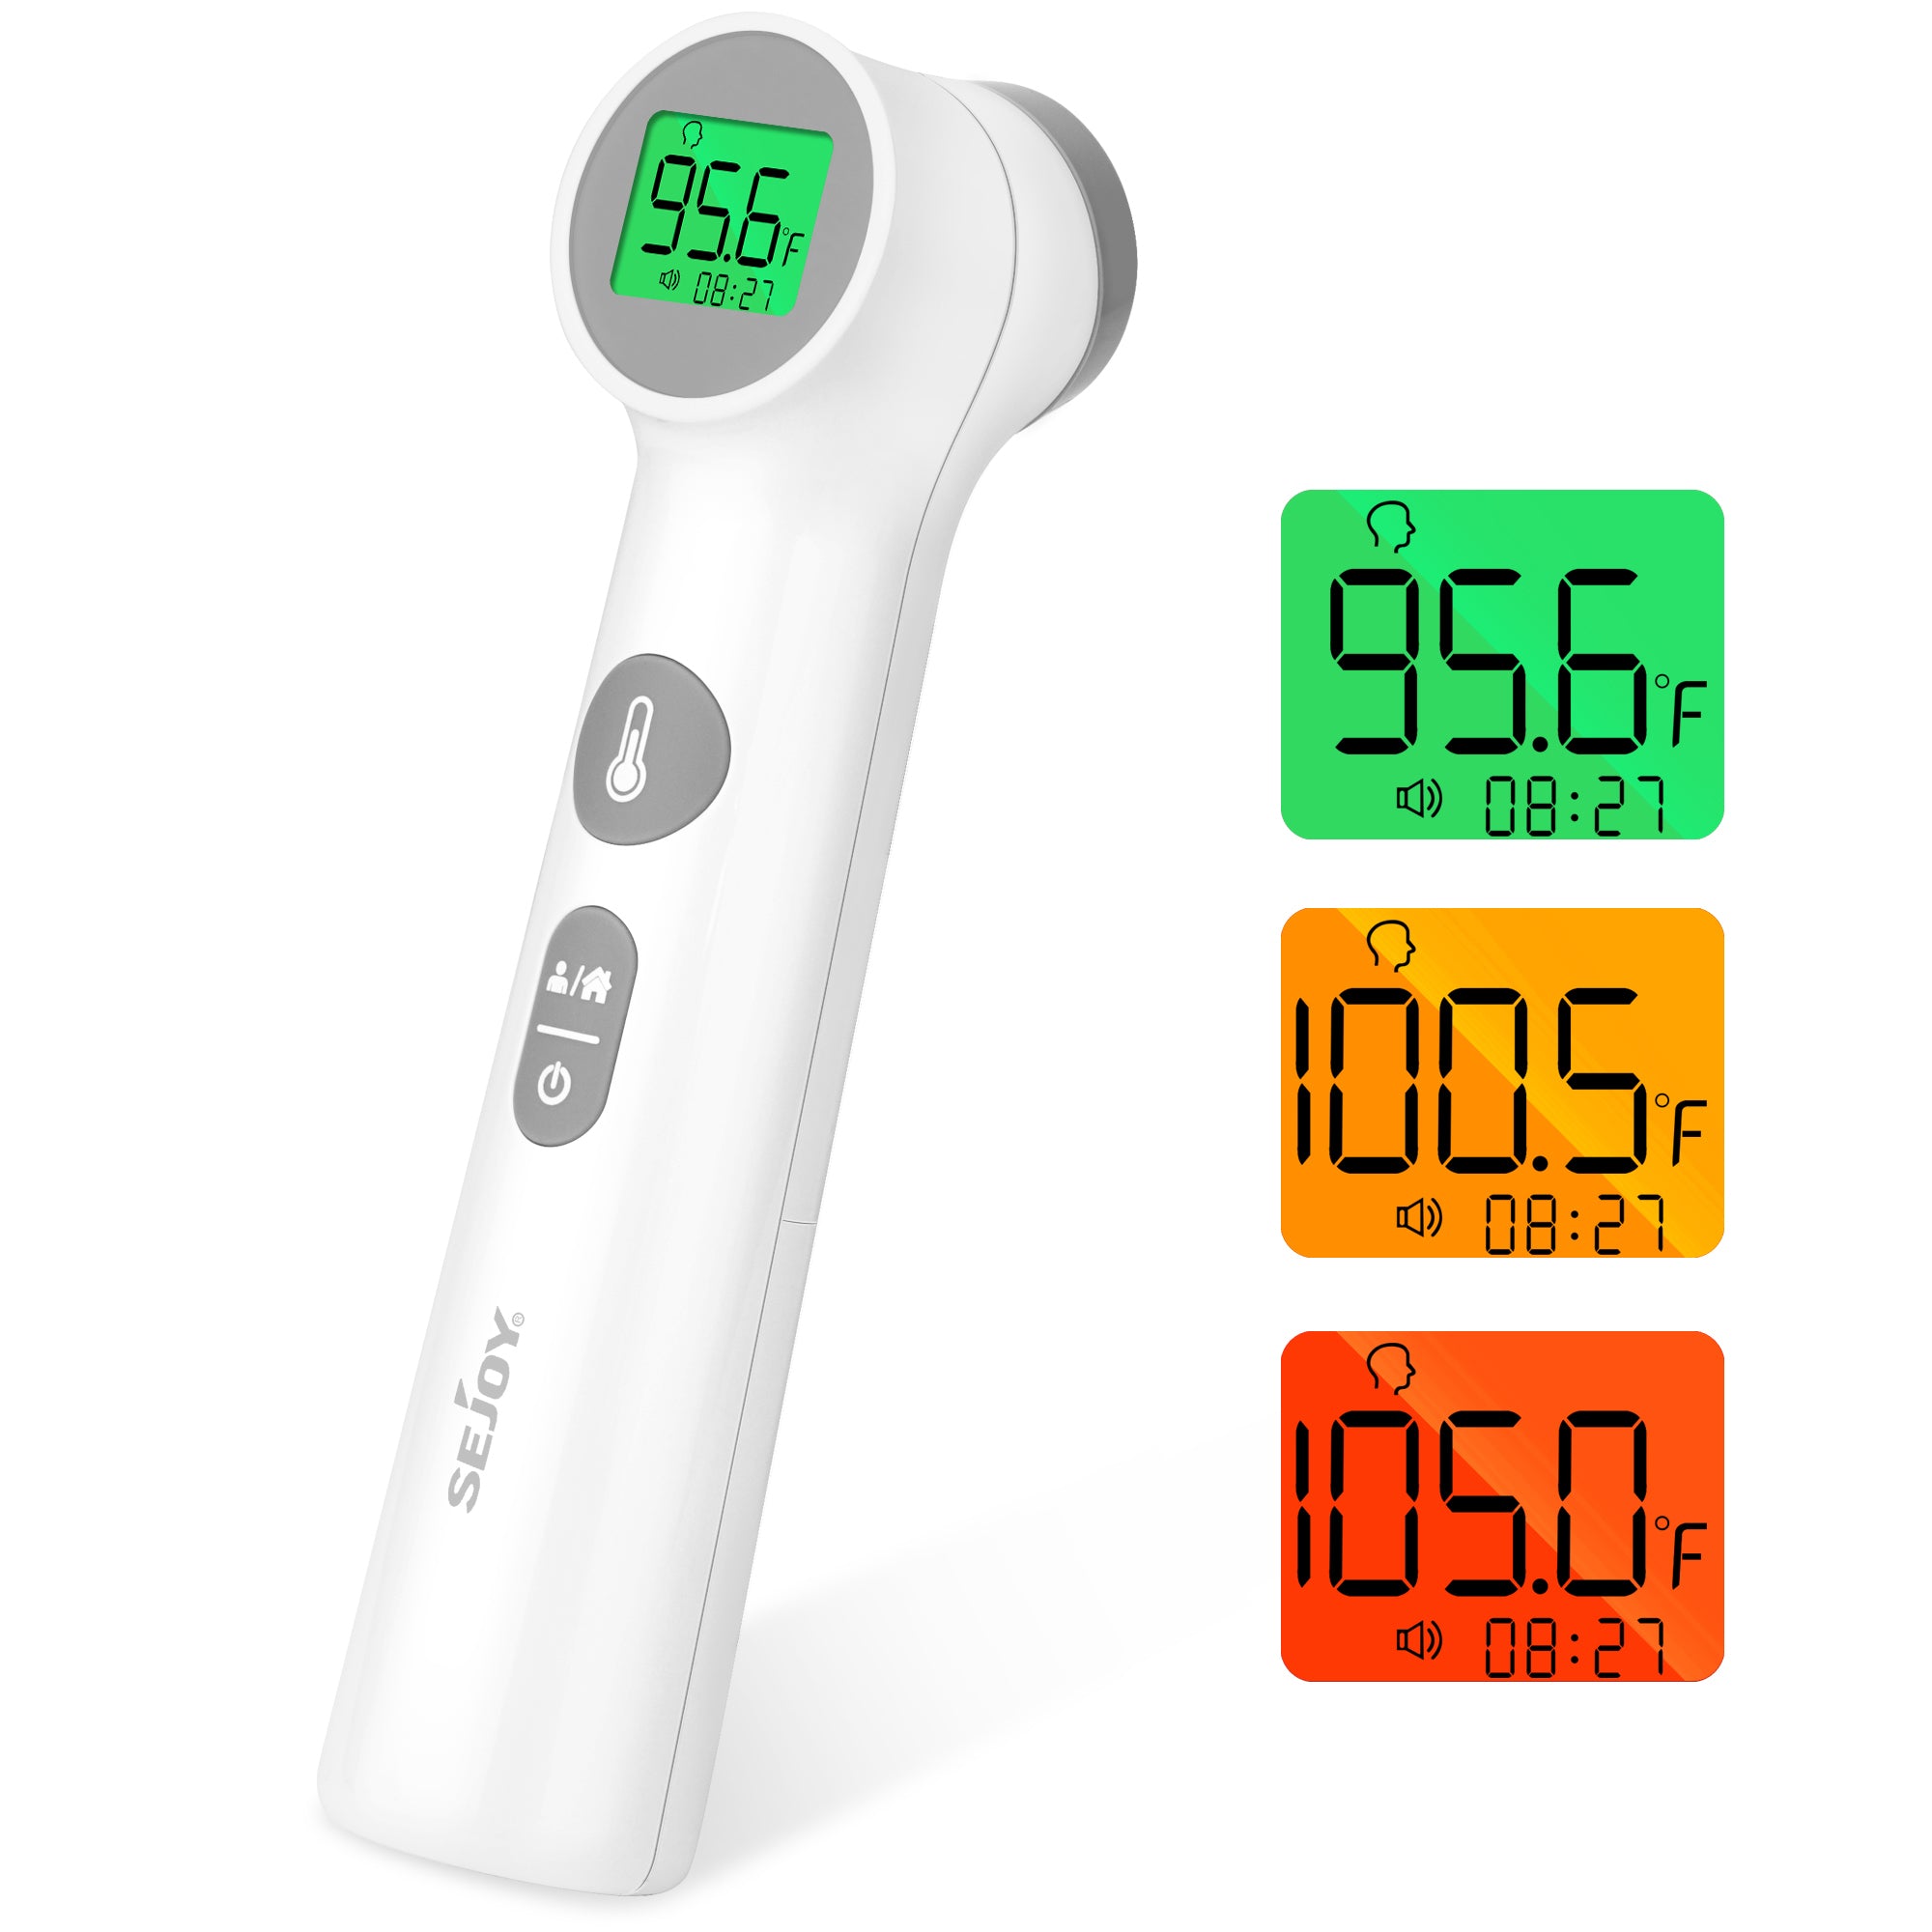 Touchless Thermometer for Adults, Non-Contact Ear and Forehead Thermometer  - Digital Infrared Thermometer for Fever with LCD Screen, Memory Recall